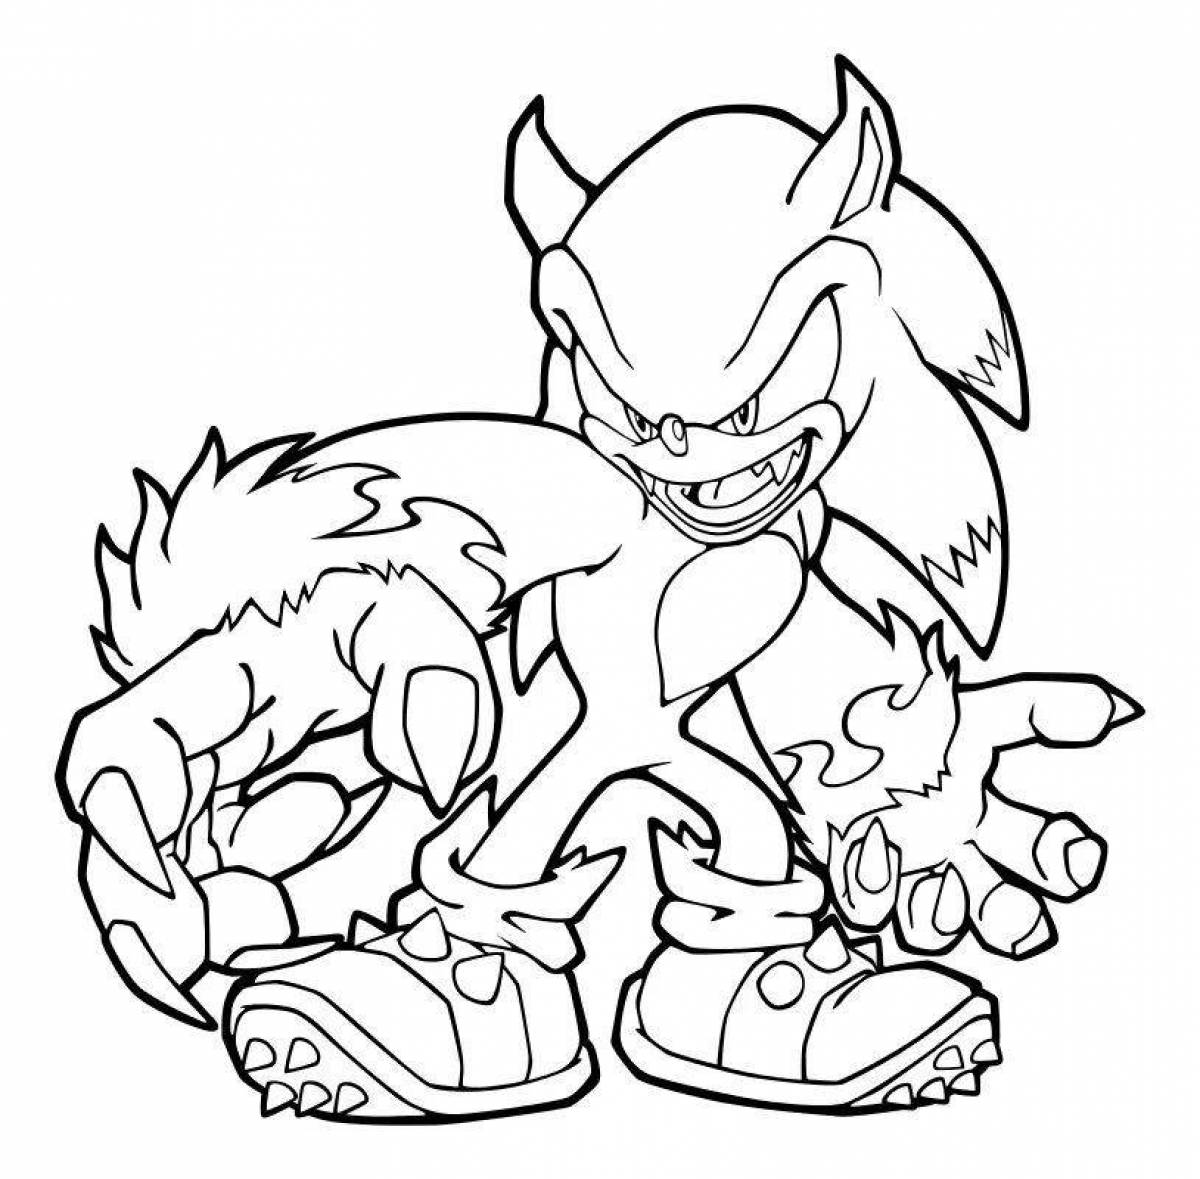 Sonic werewolf coloring book